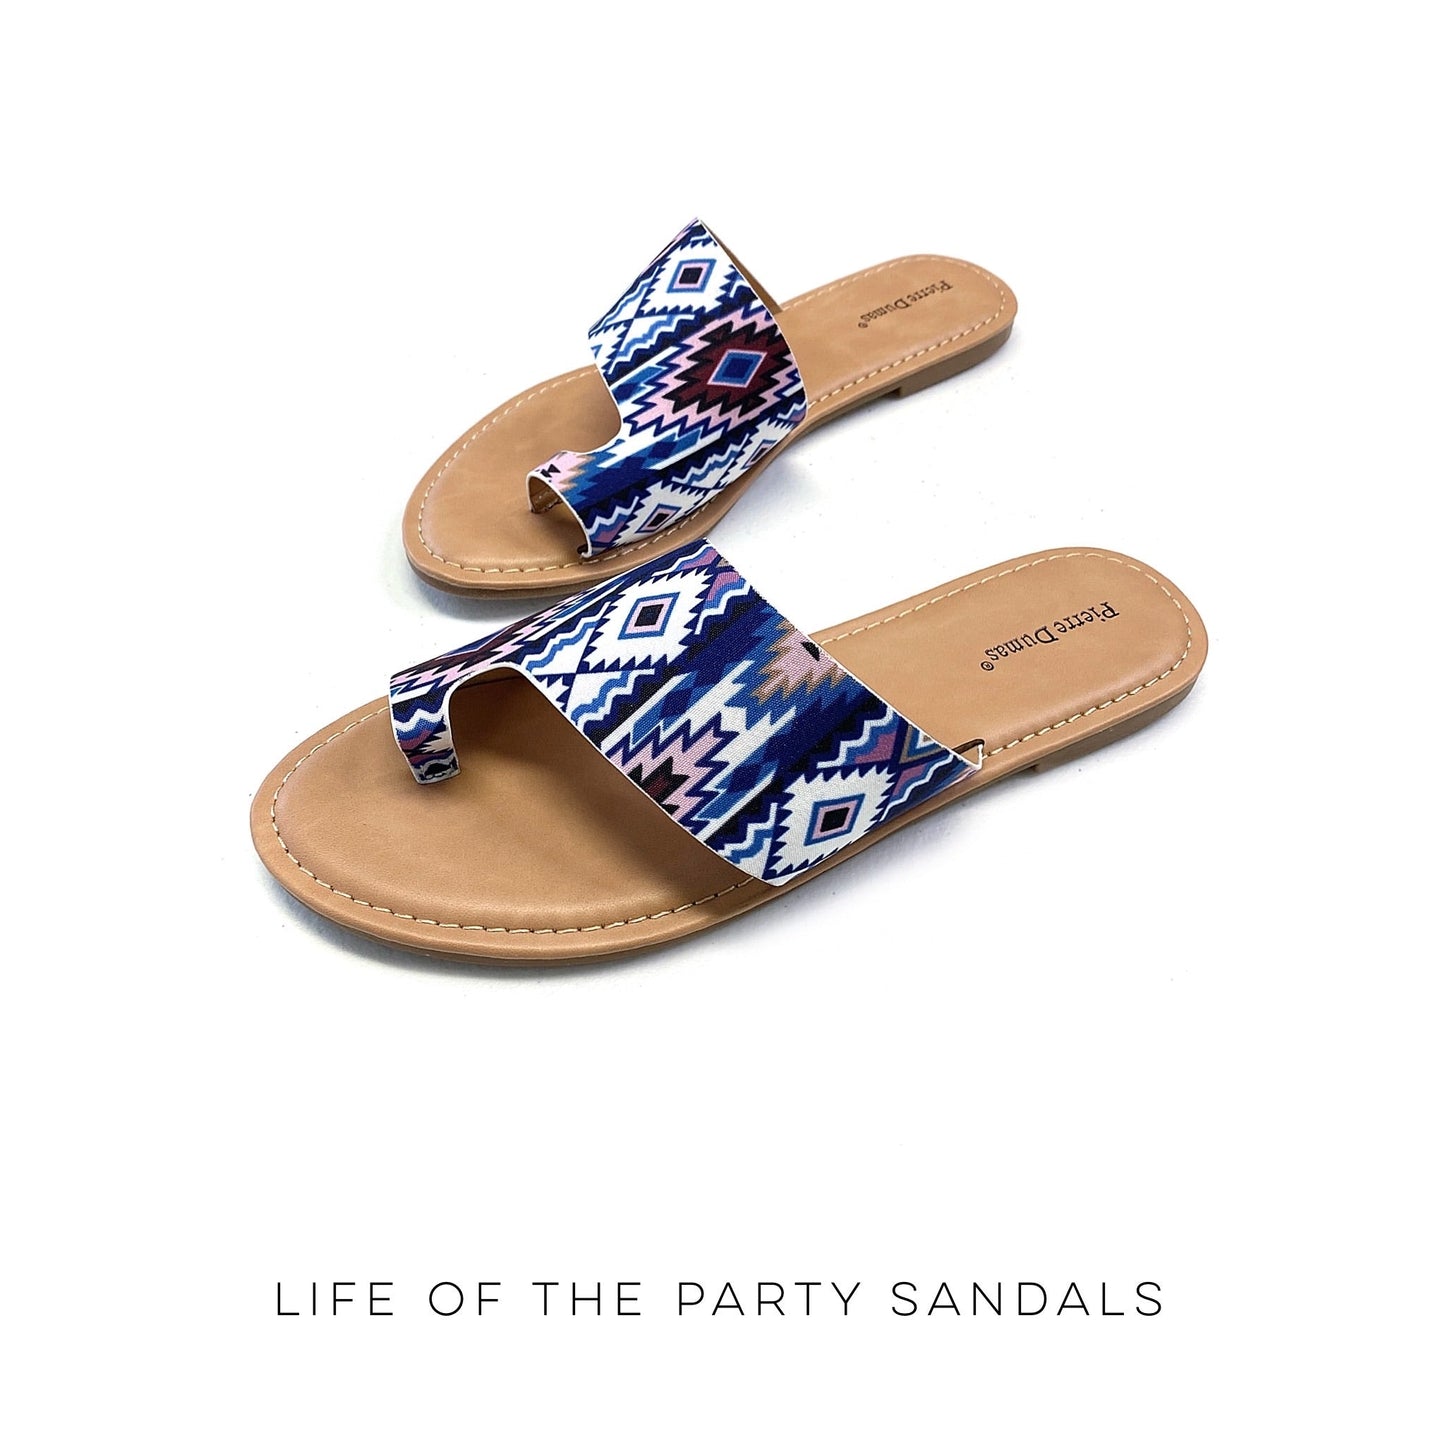 I'm The Life of the Party Sandals